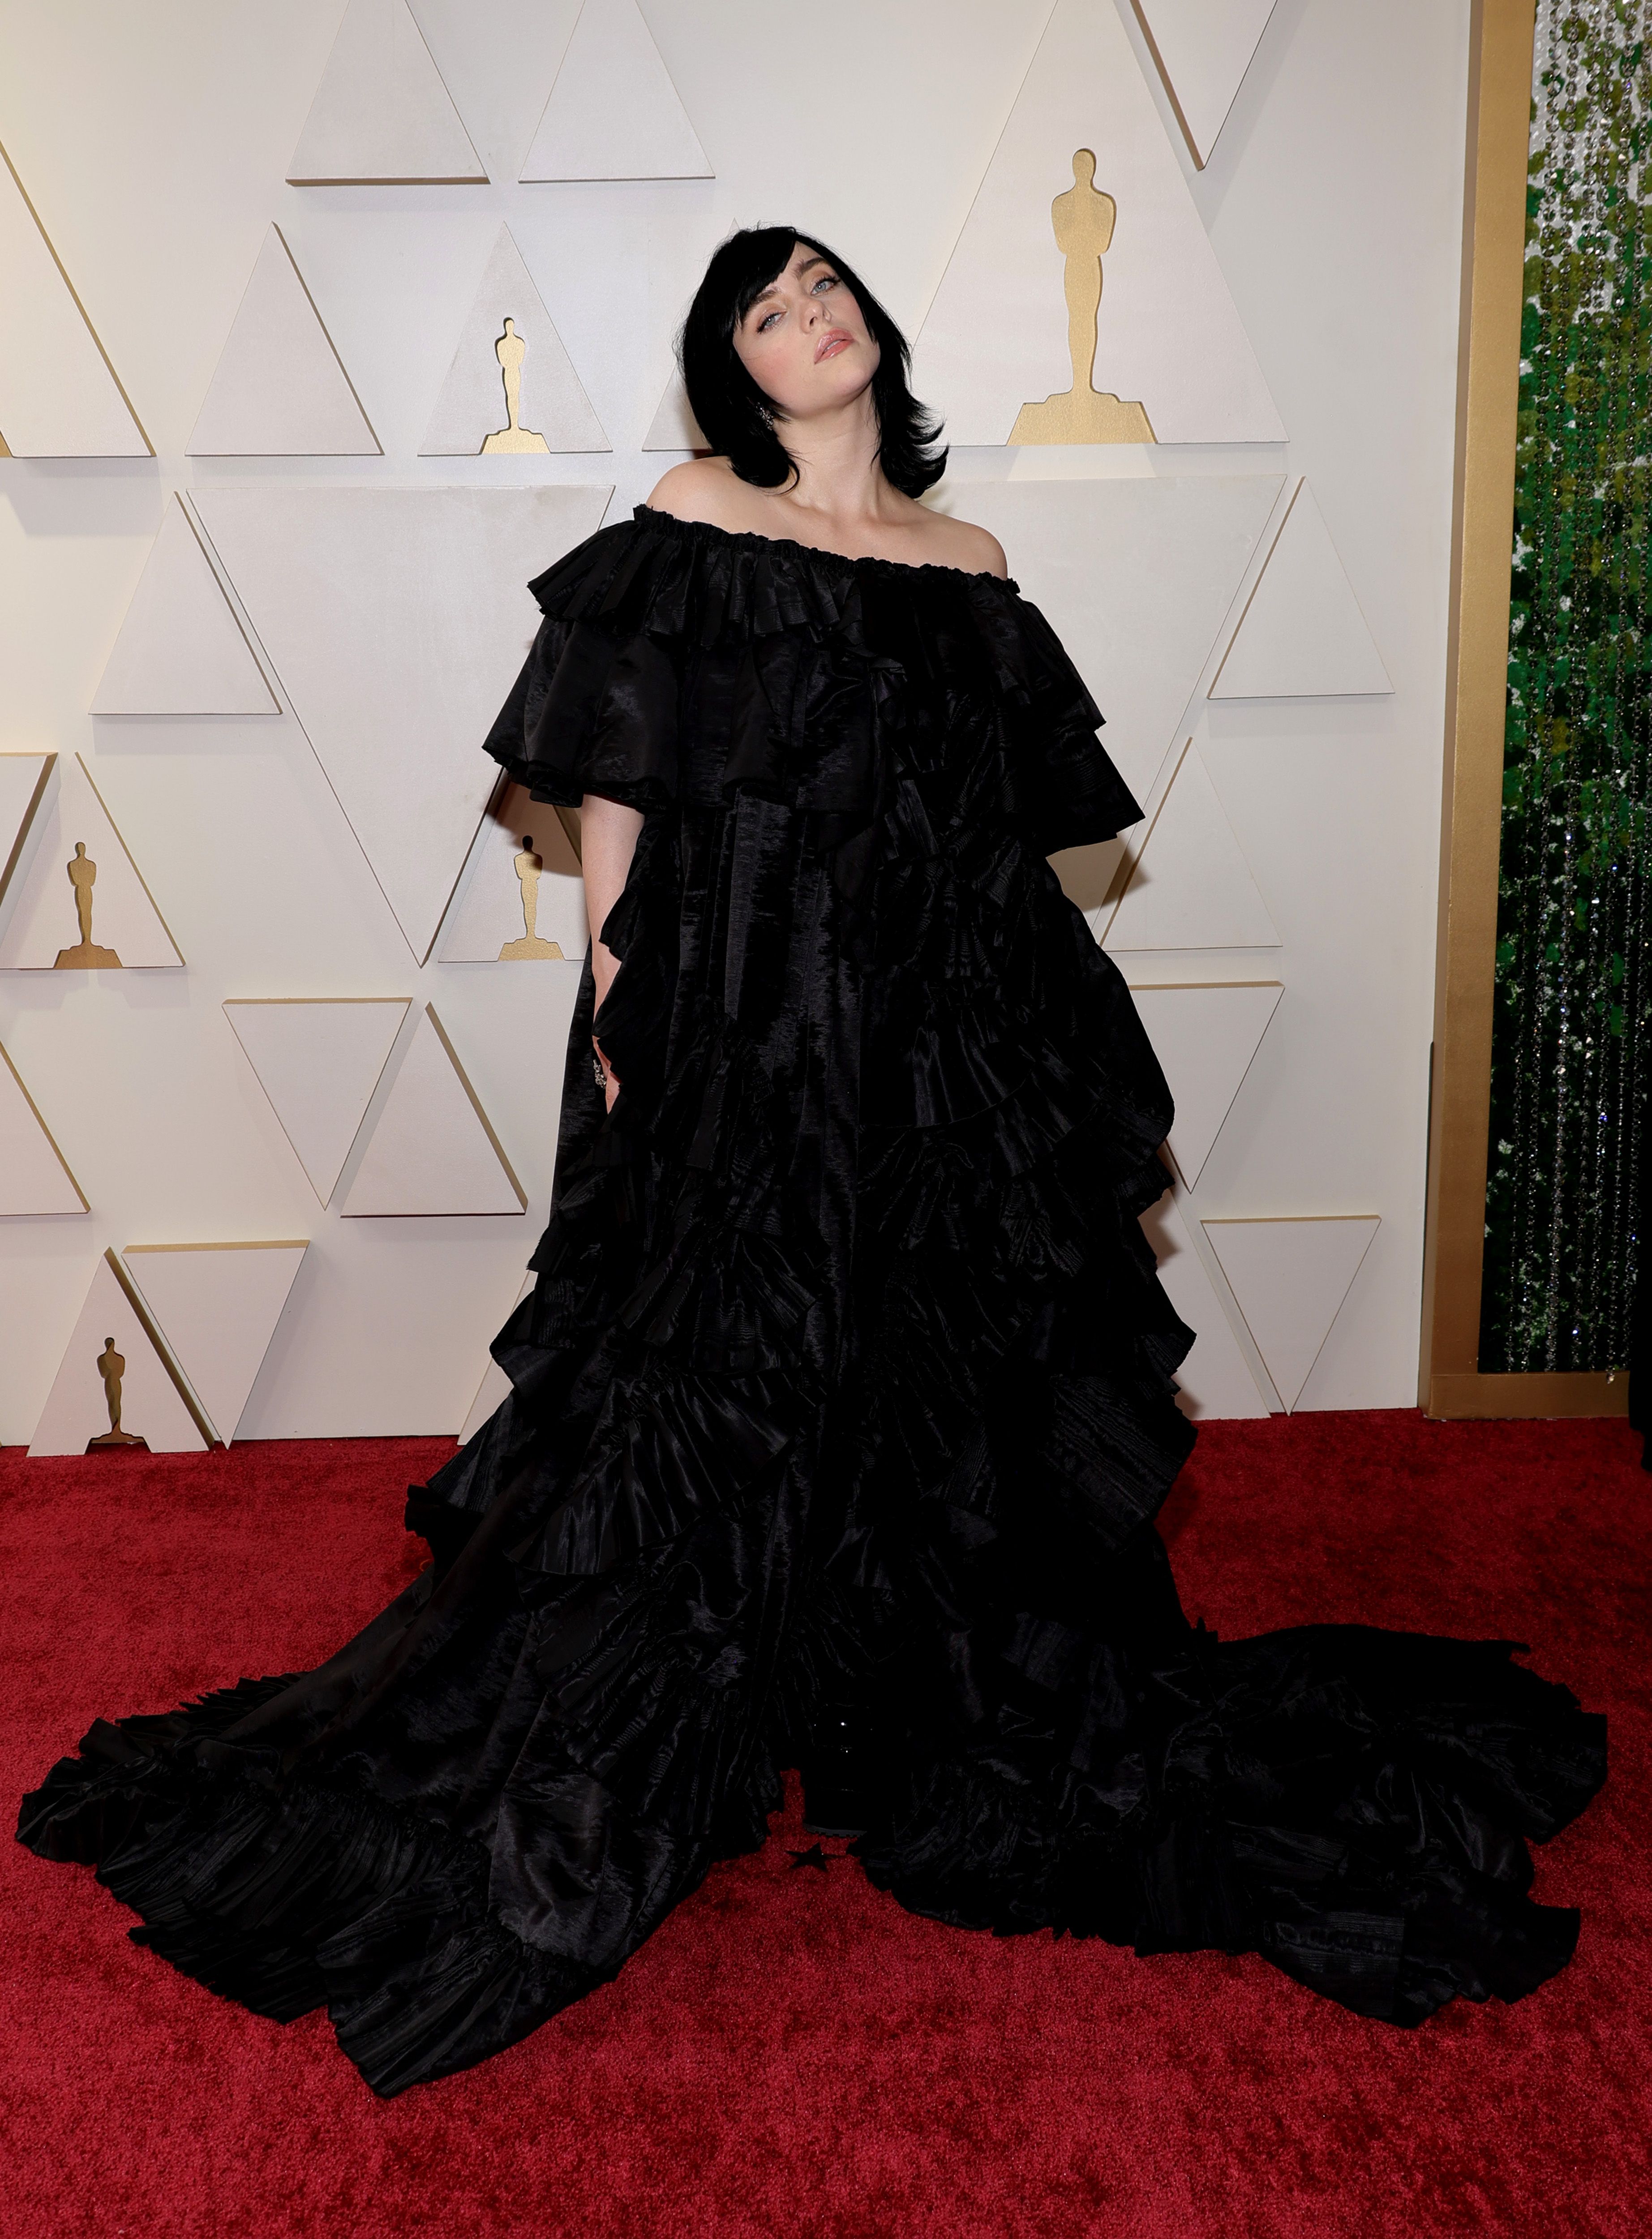 Billie Eilish Dazzled In A Ruffled Gucci Gown On the 2022 Oscars Red Carpet